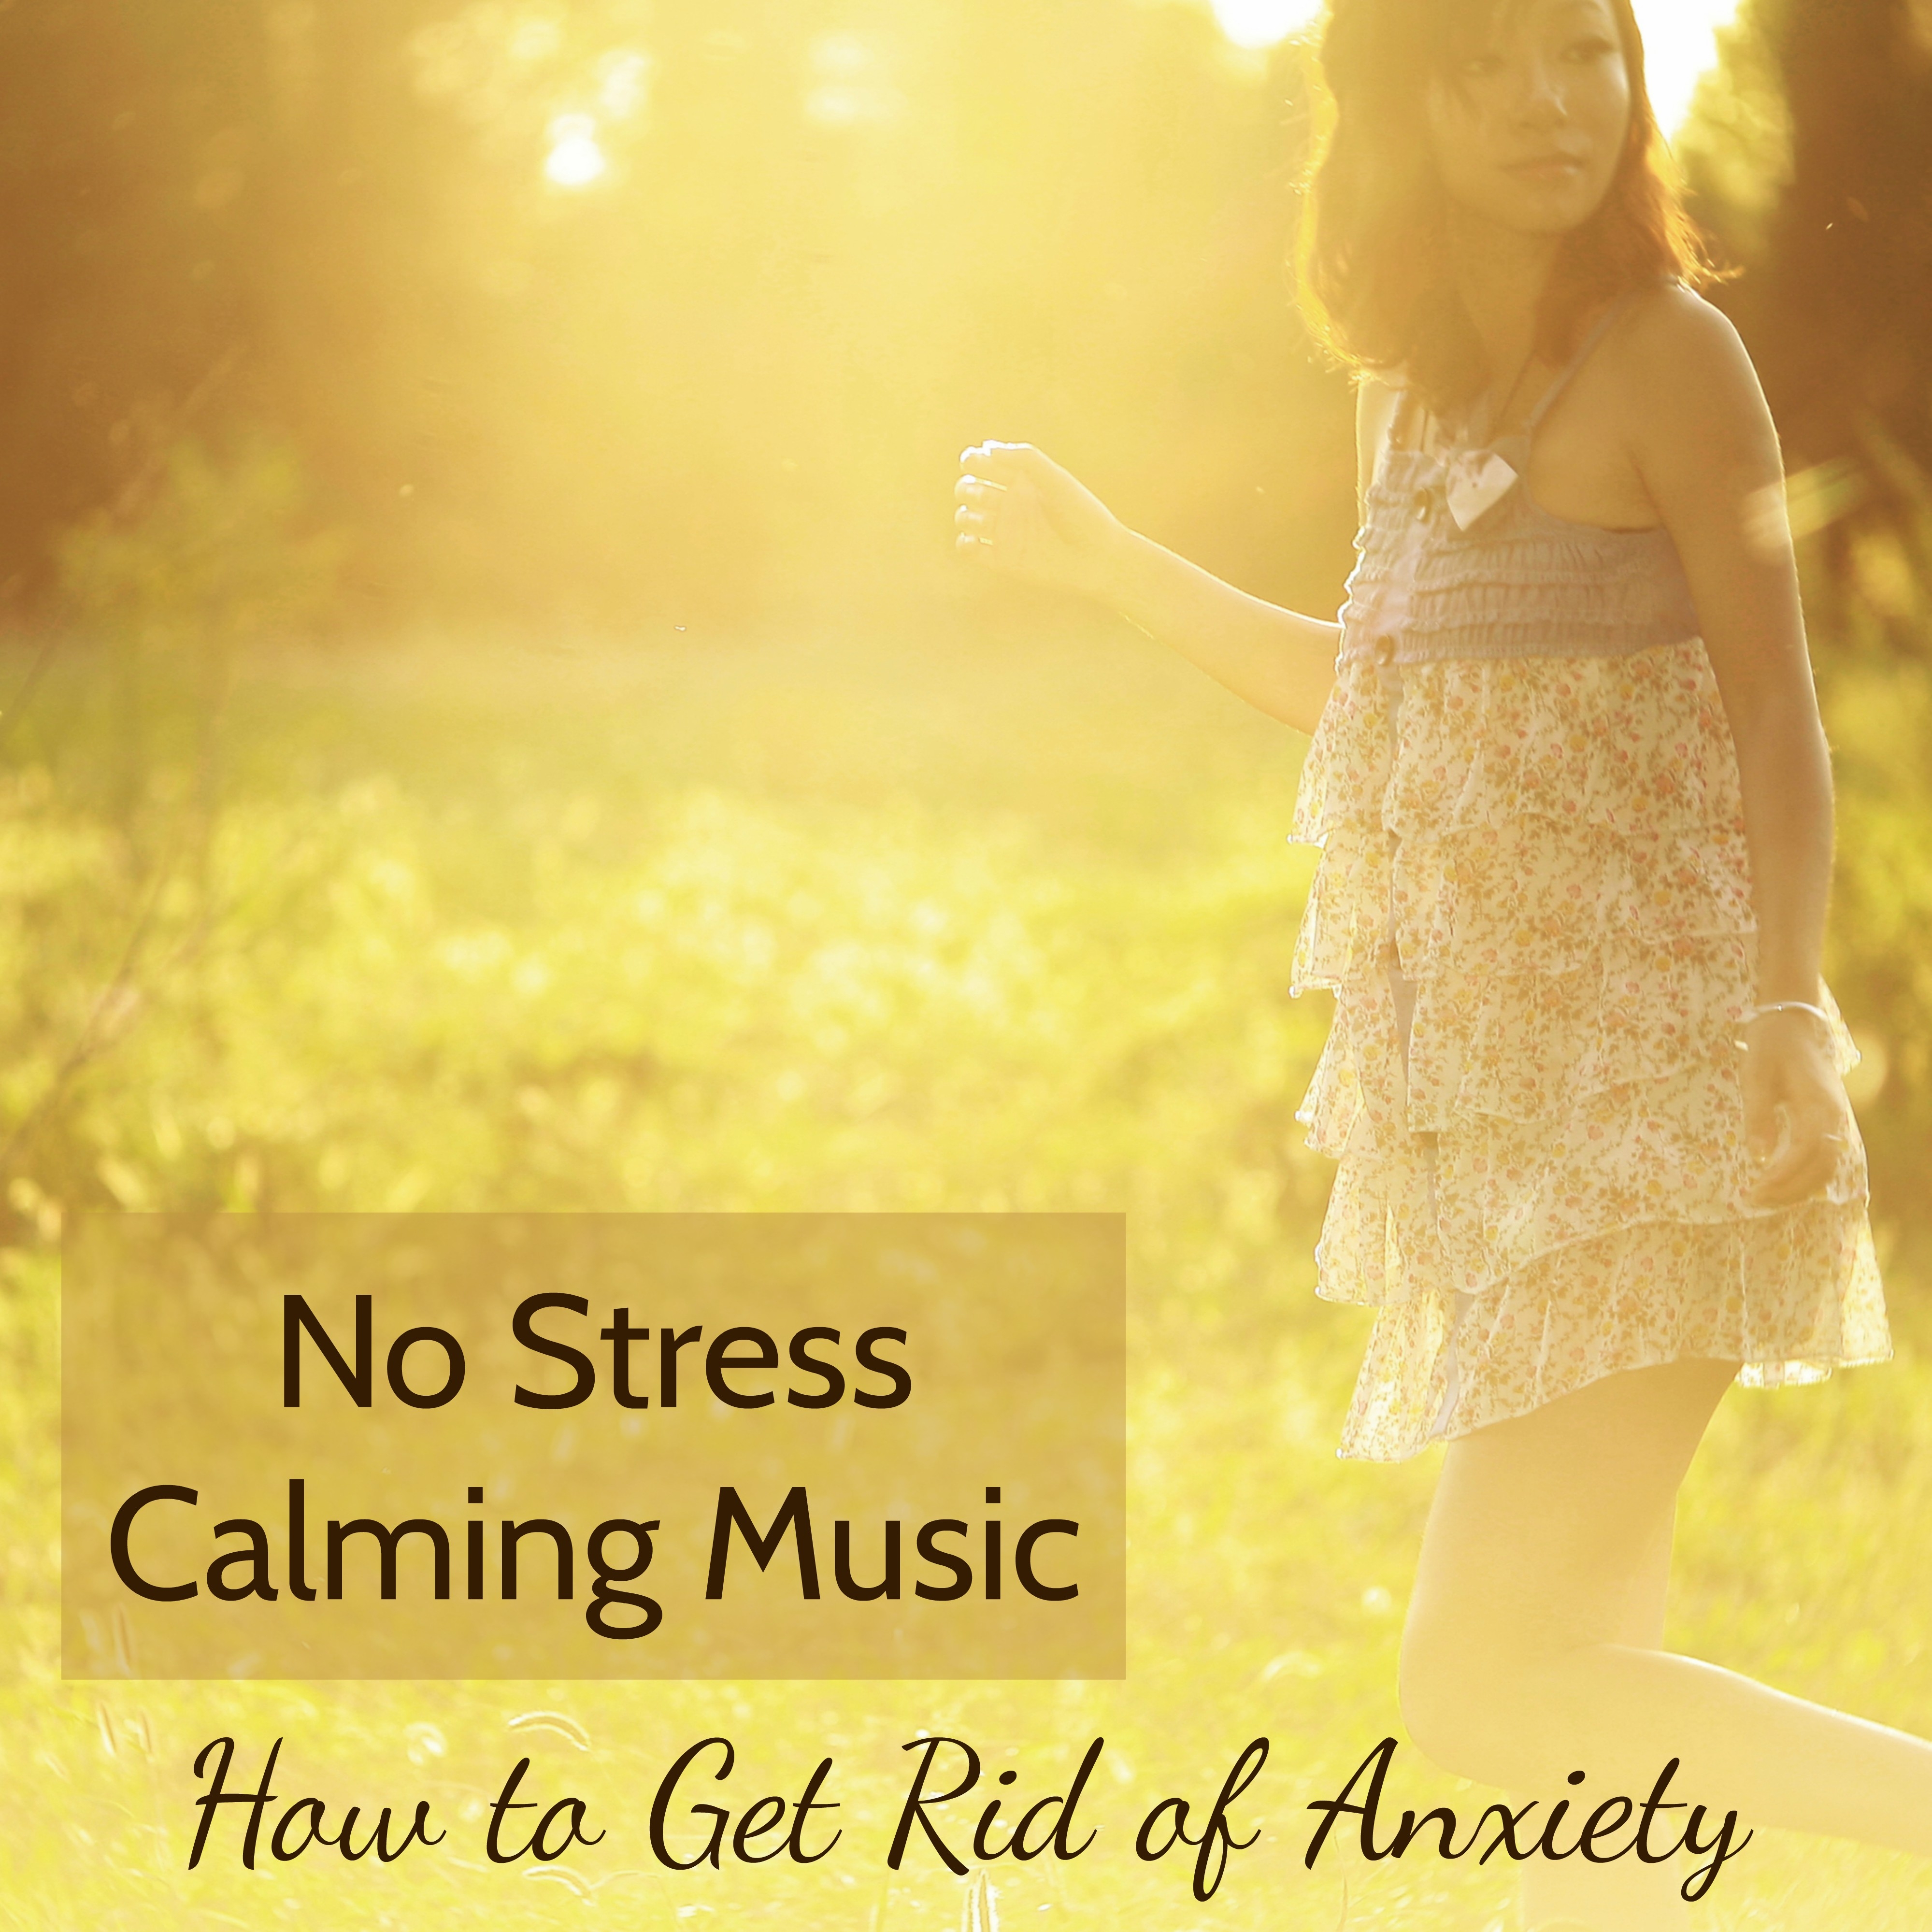 No Stress Calming Music - How to Get Rid of Anxiety